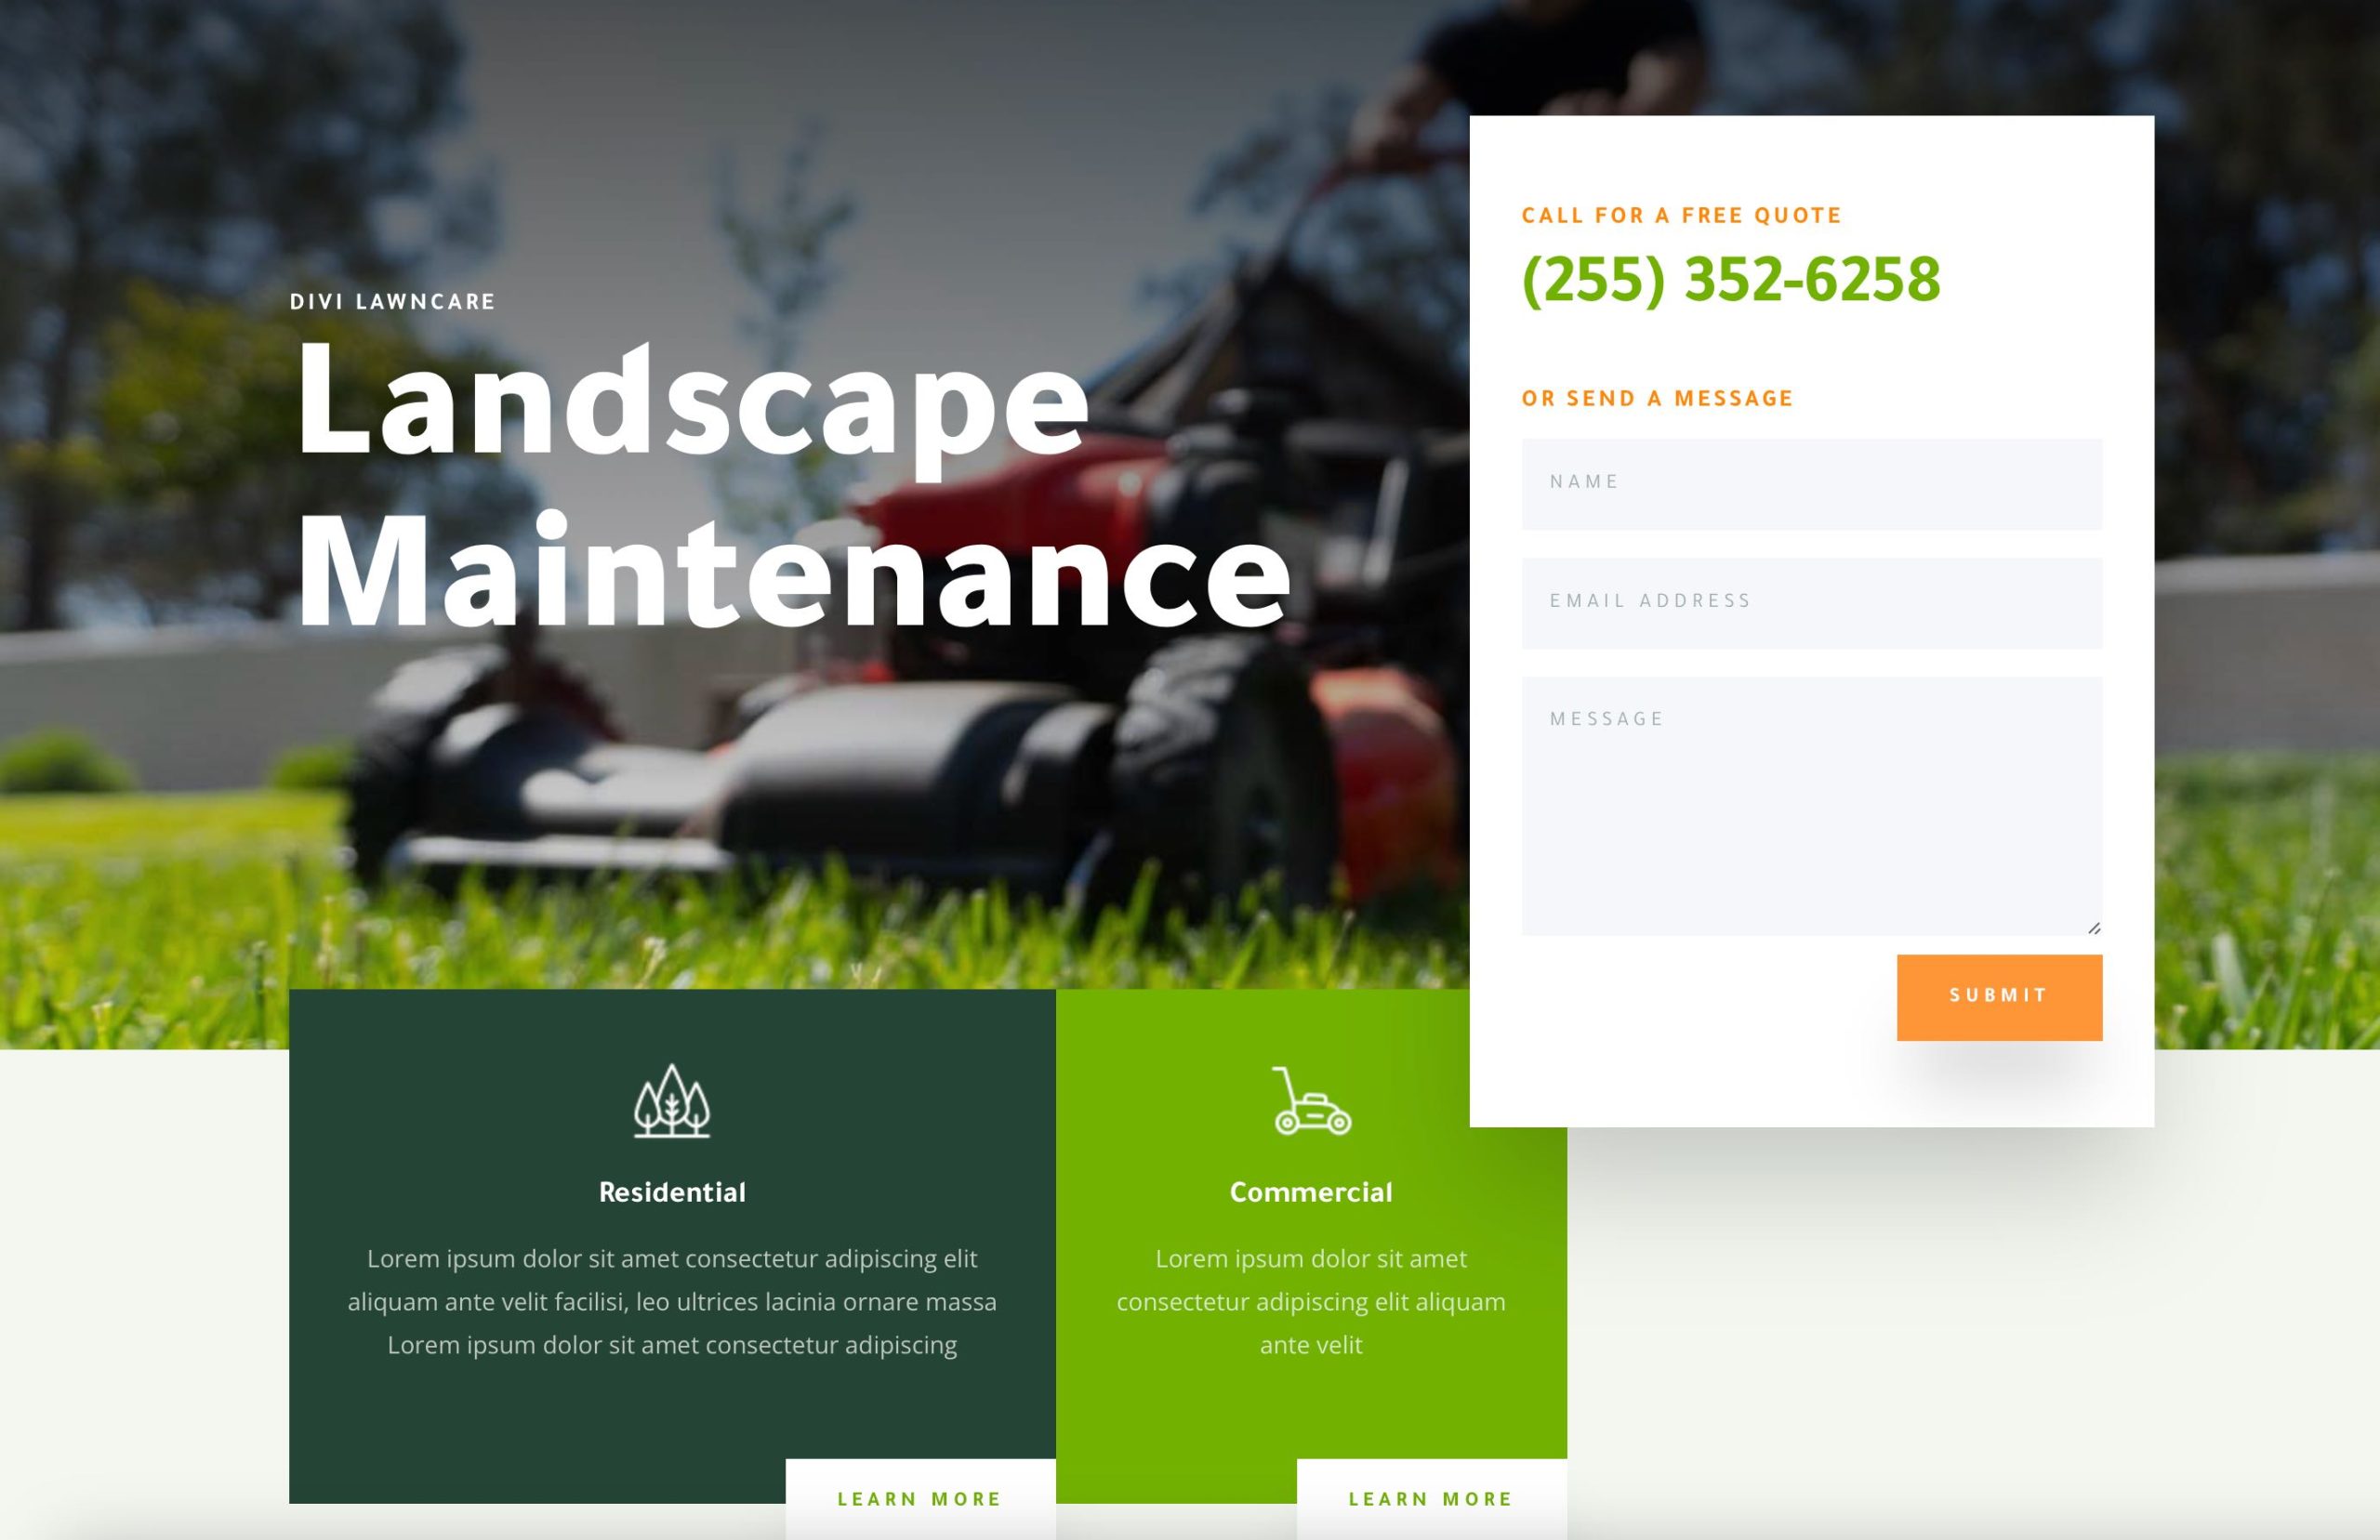 Why you need a landscaping website for your landscaping business